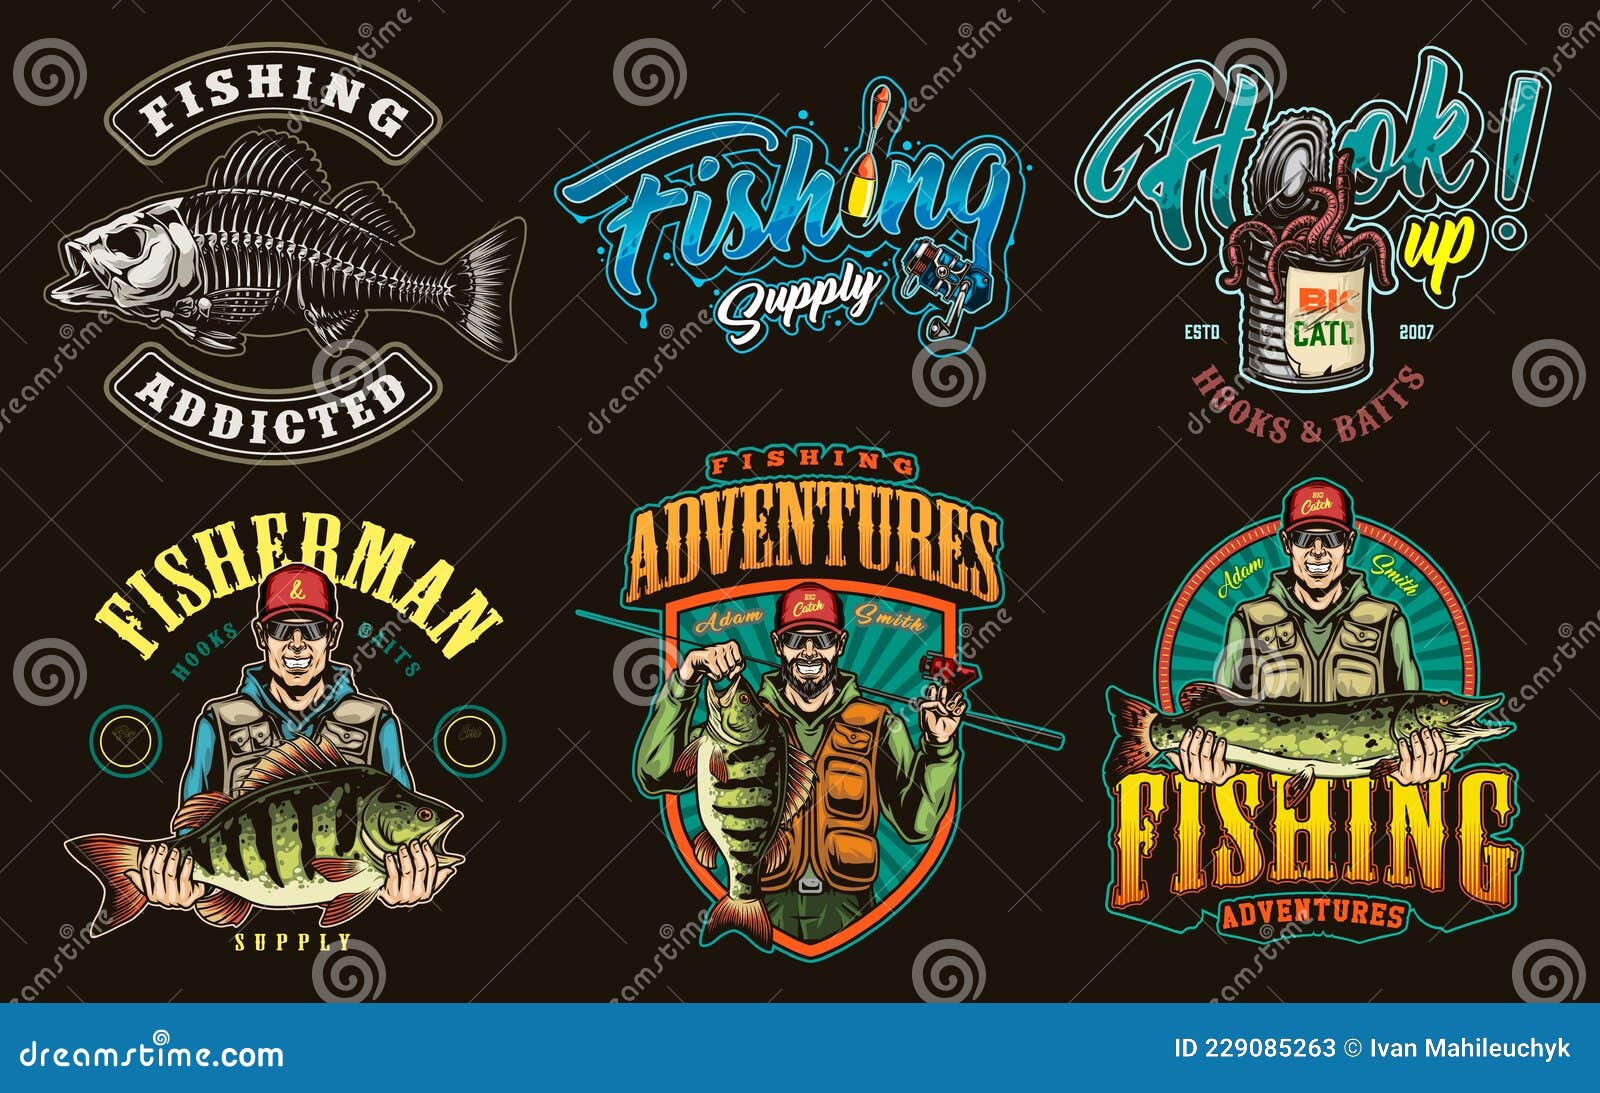 Colorful Vintage Fishing Prints Stock Vector - Illustration of